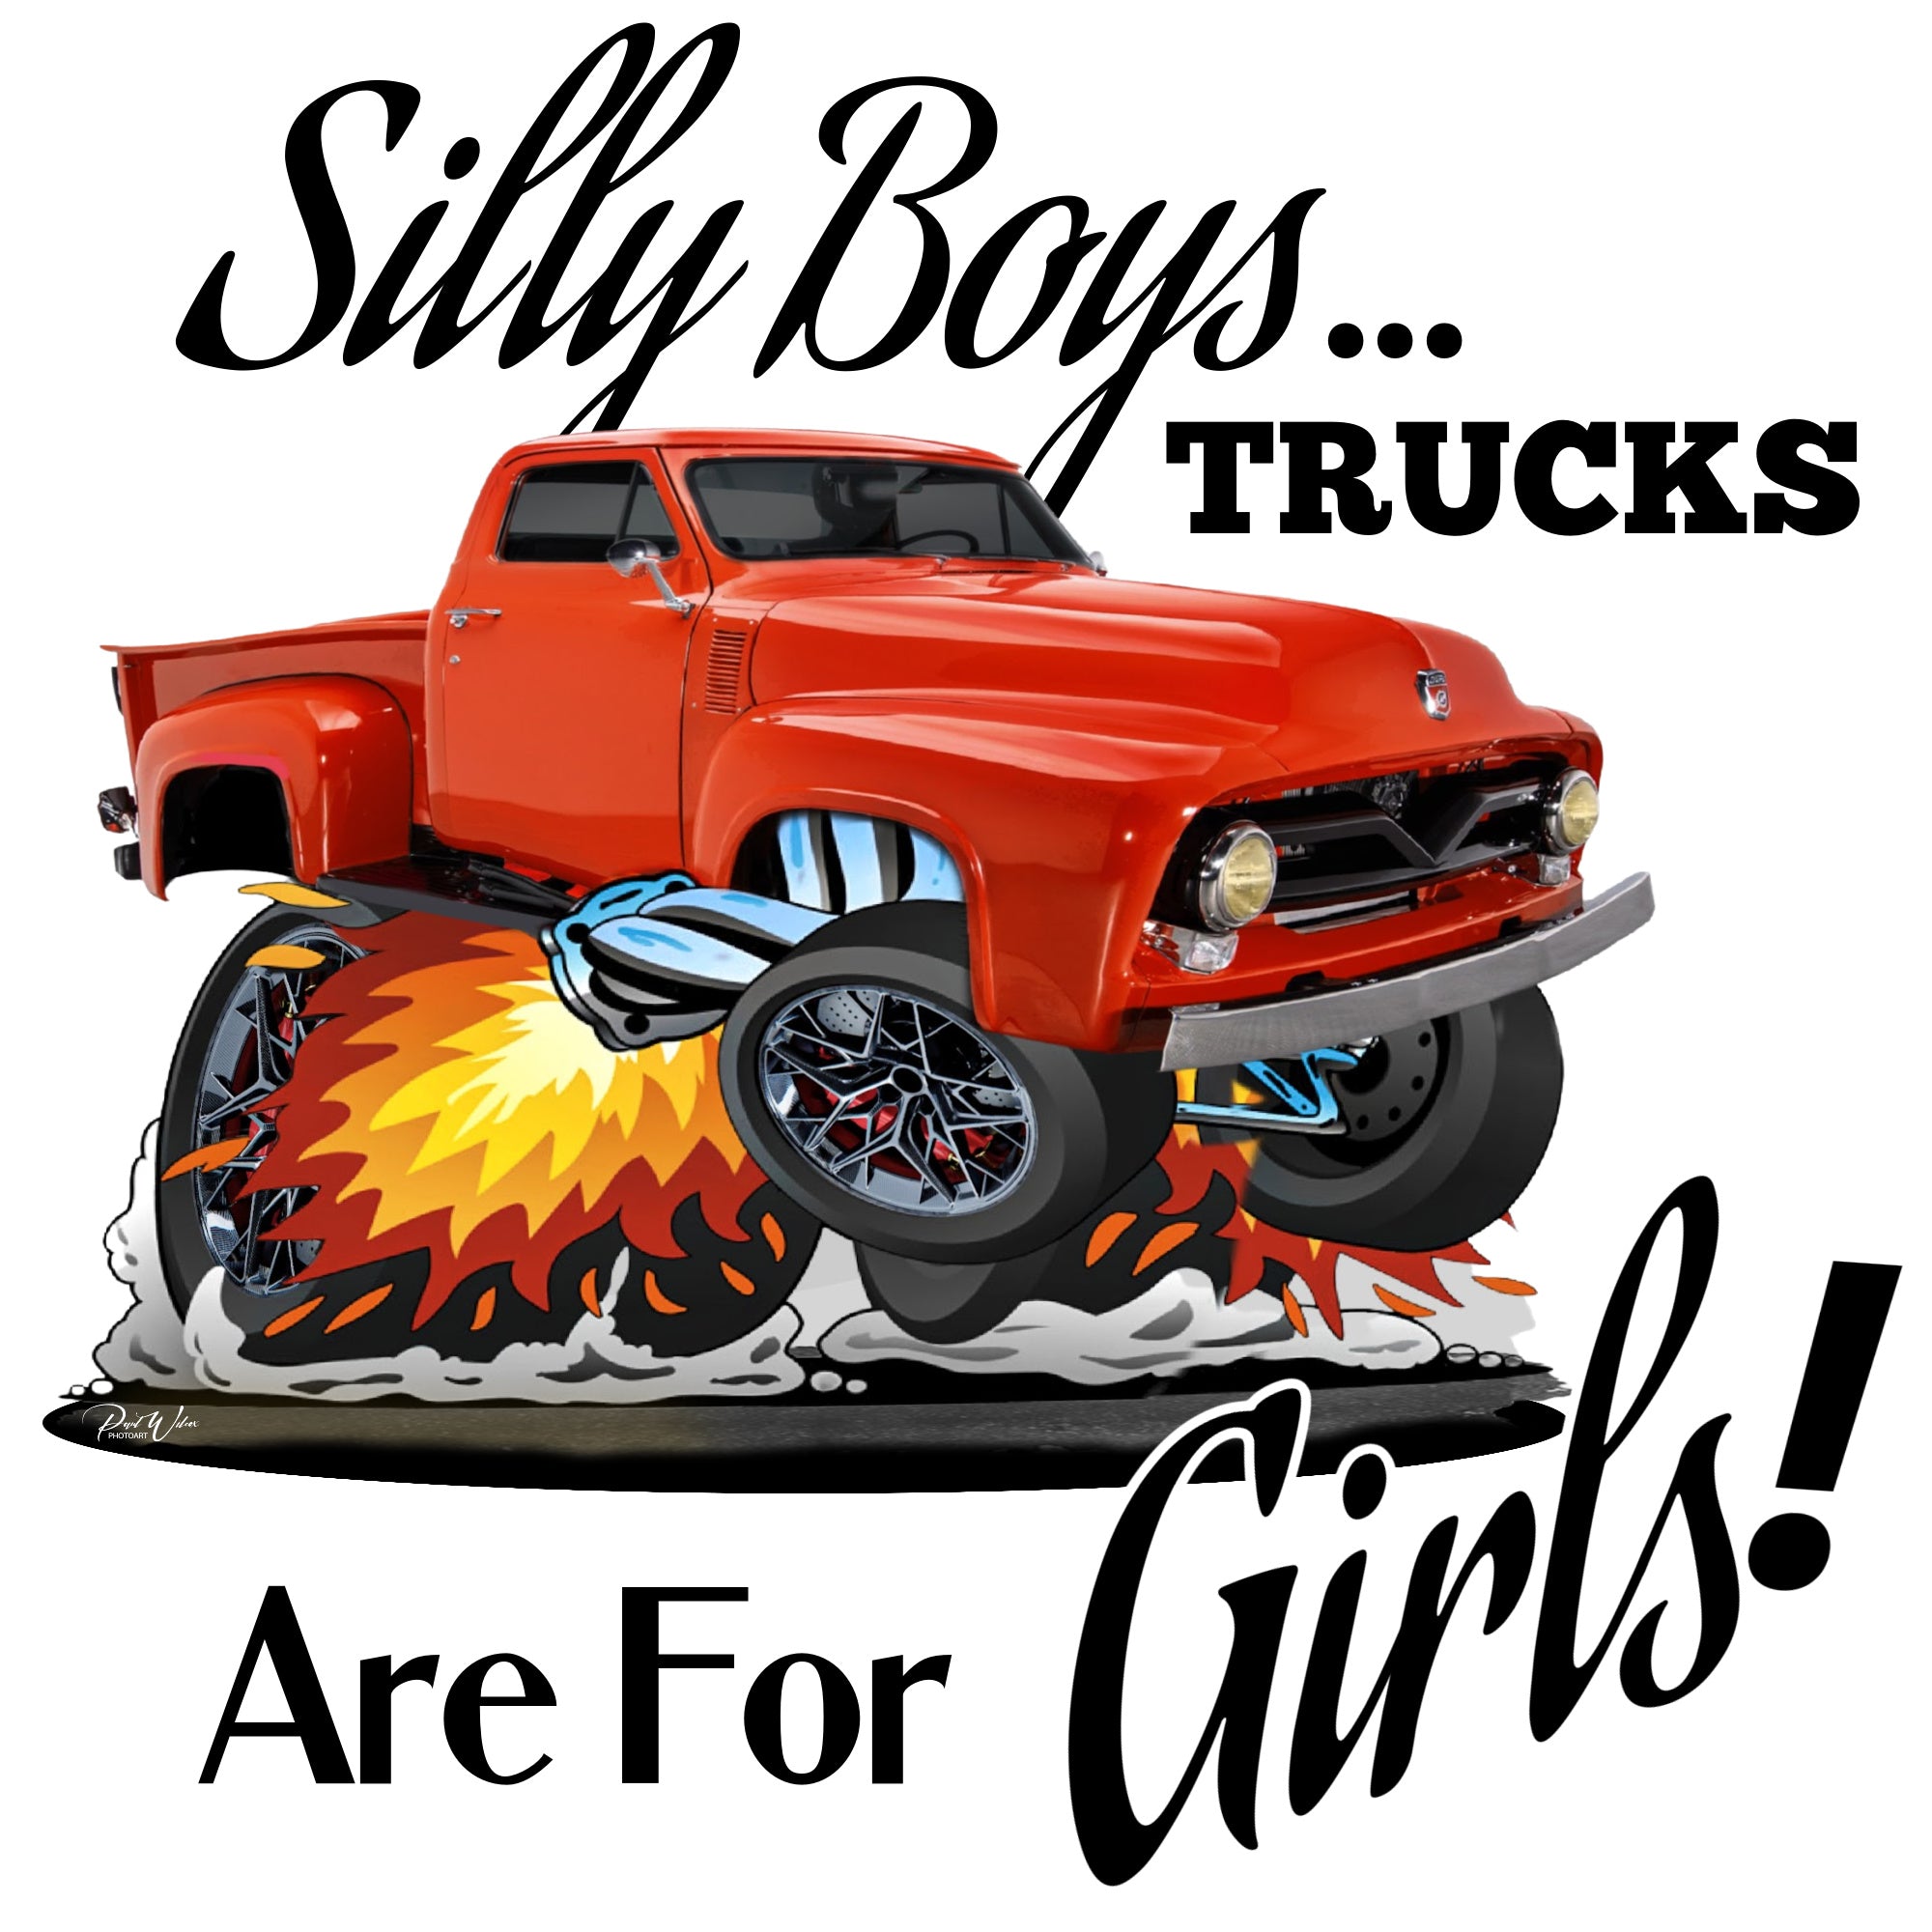 Silly Boys ... Trucks are for Girls - Image